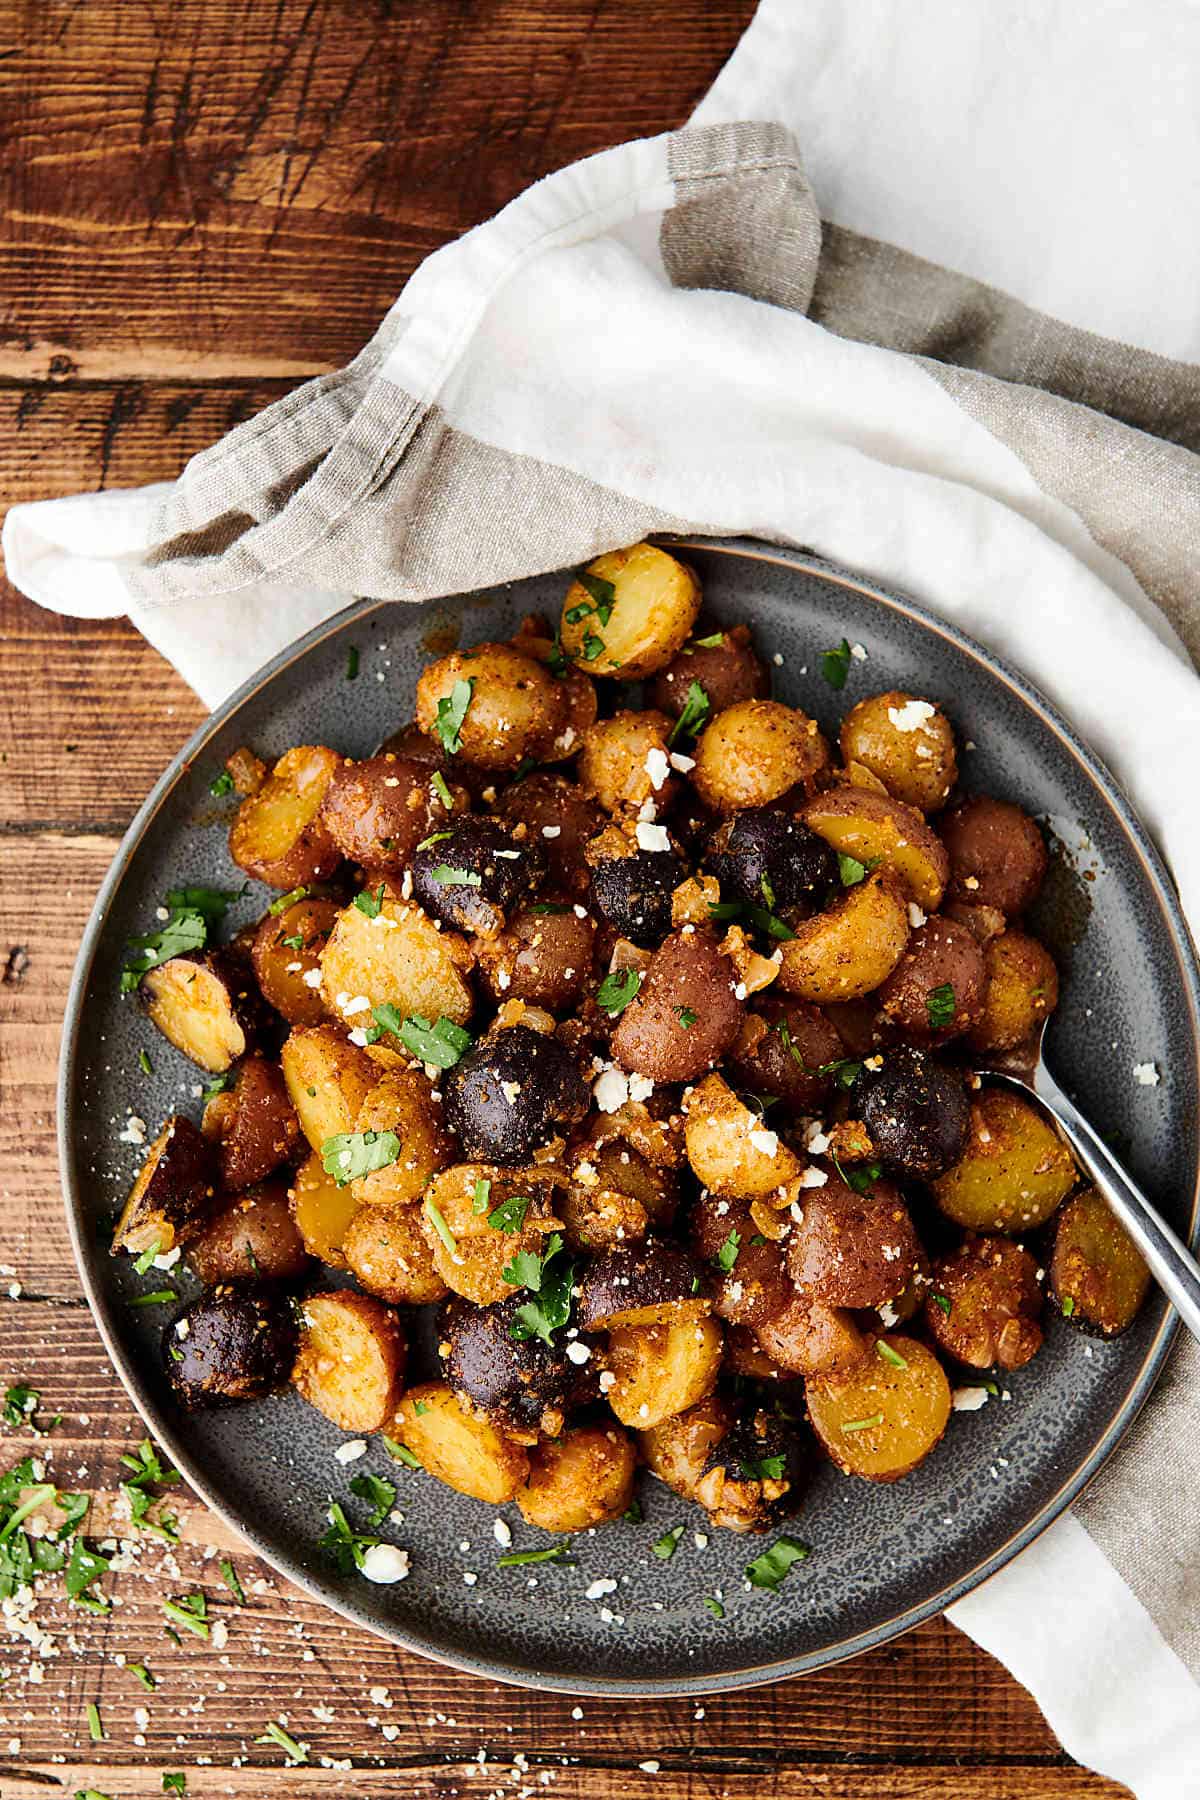 Roasted Potatoes - Easy Side Dish - 10-Minute Prep